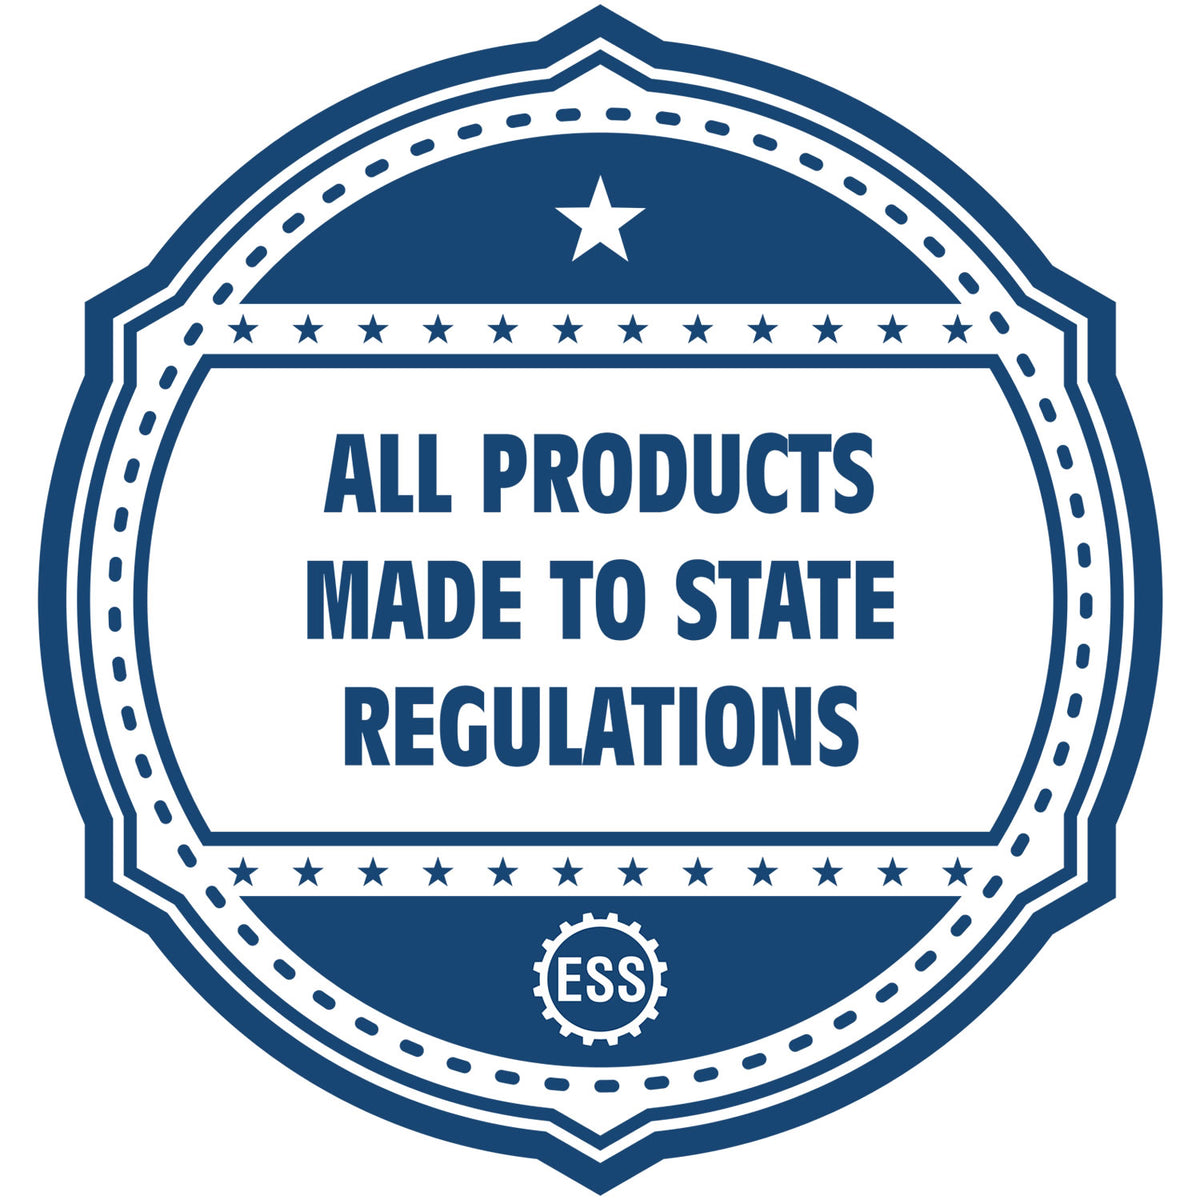 A blue icon or badge for the Hybrid Georgia Engineer Seal showing that this product is made in compliance with state regulations.